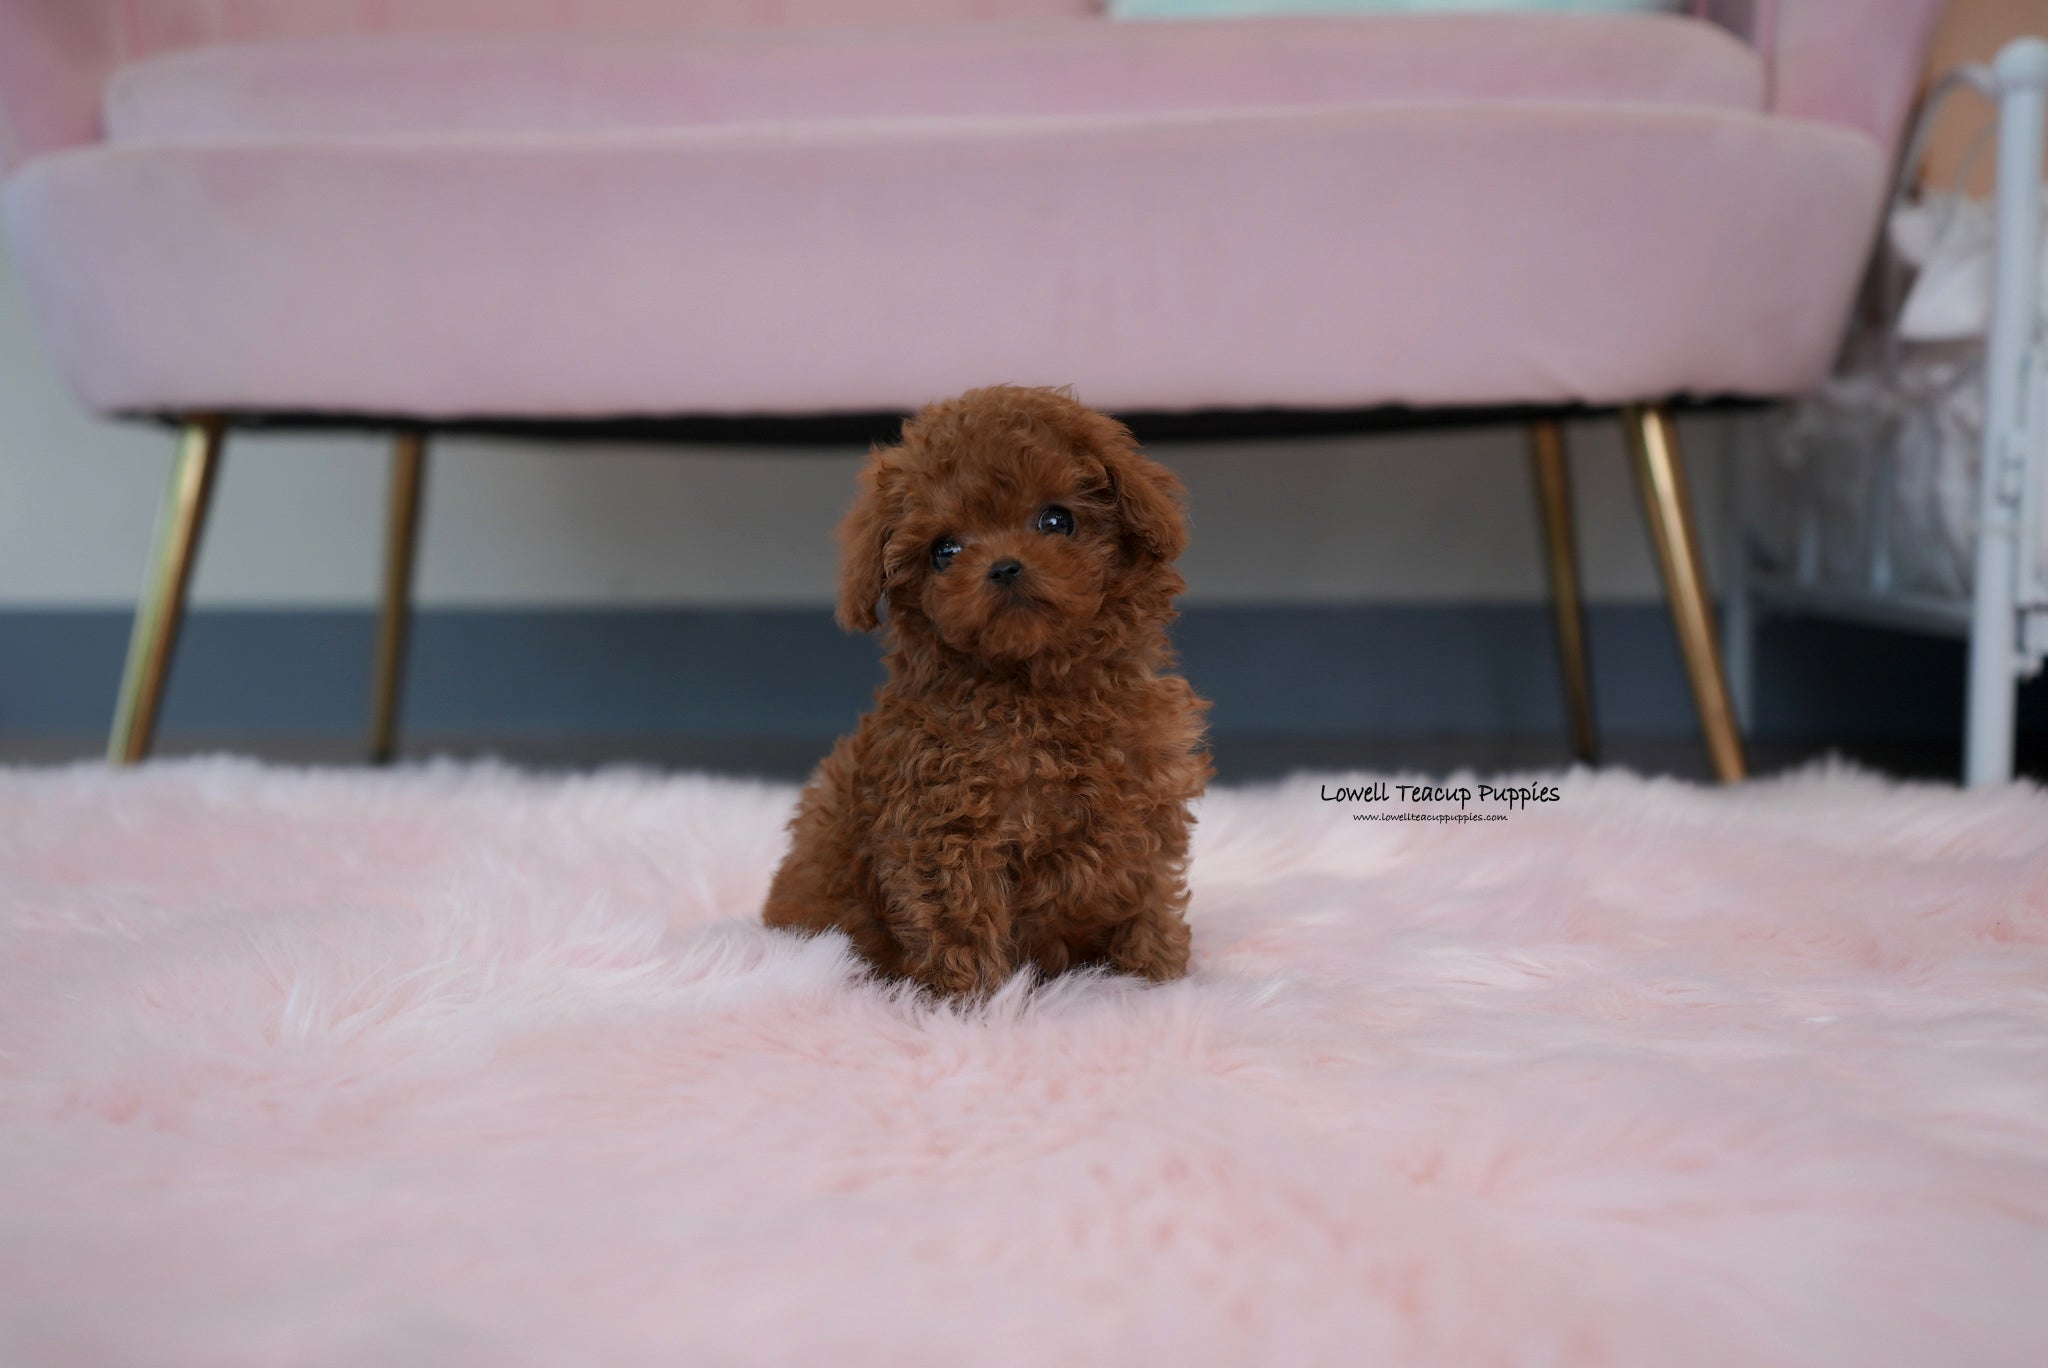 Somto  / Teacup Poodle Female [Jane] - Lowell Teacup Puppies inc